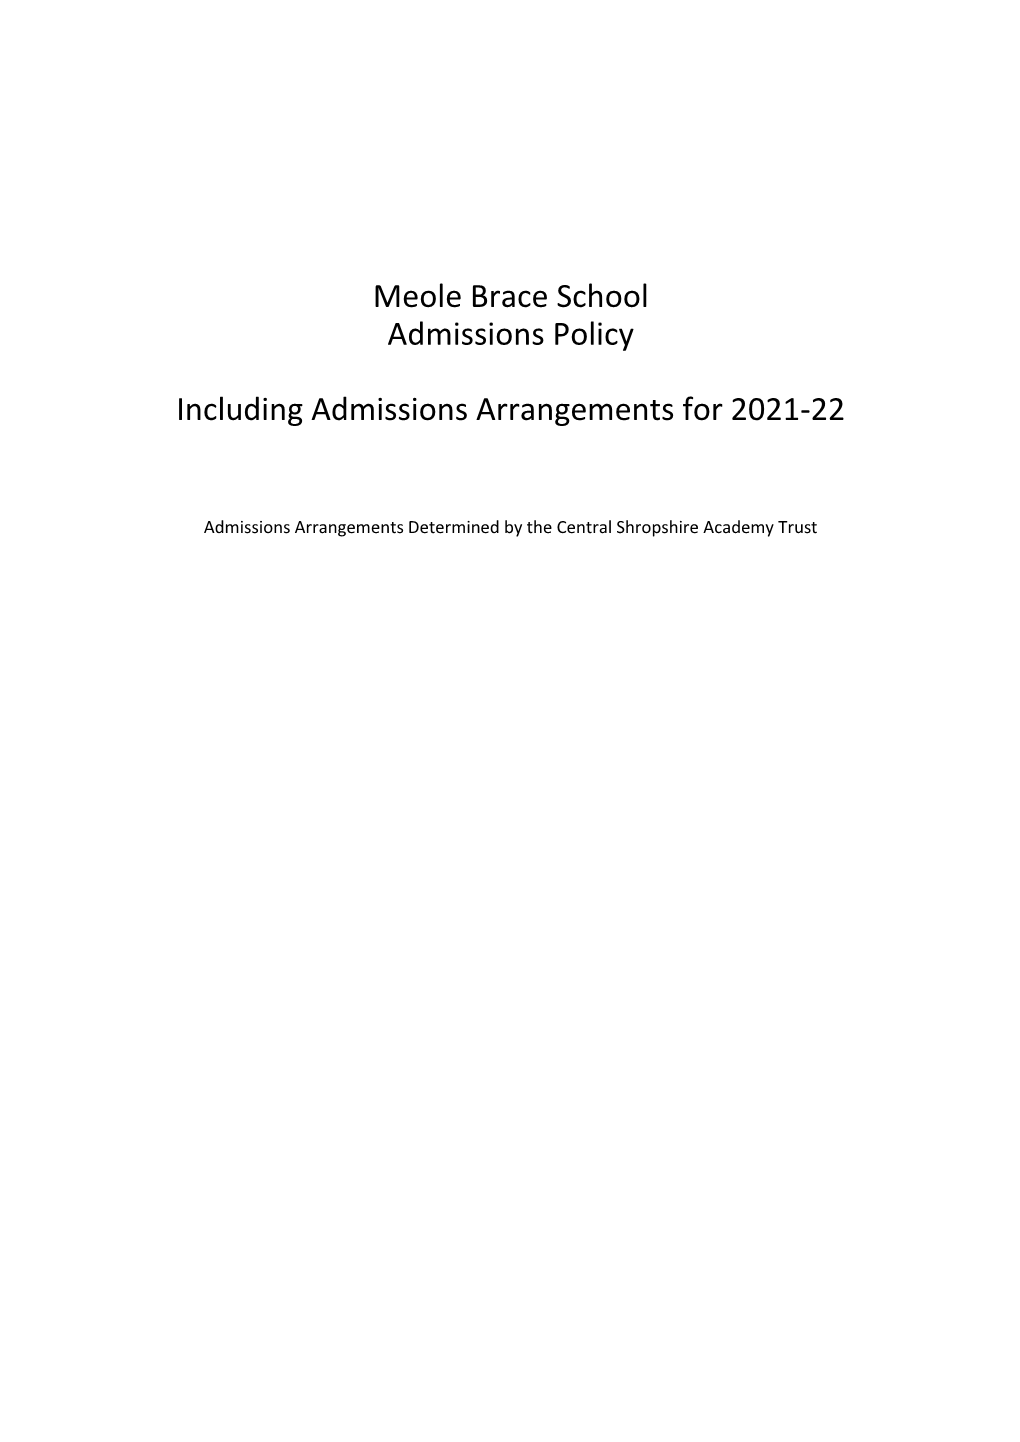 MBS Admissions Policy and Arrangements 21-22